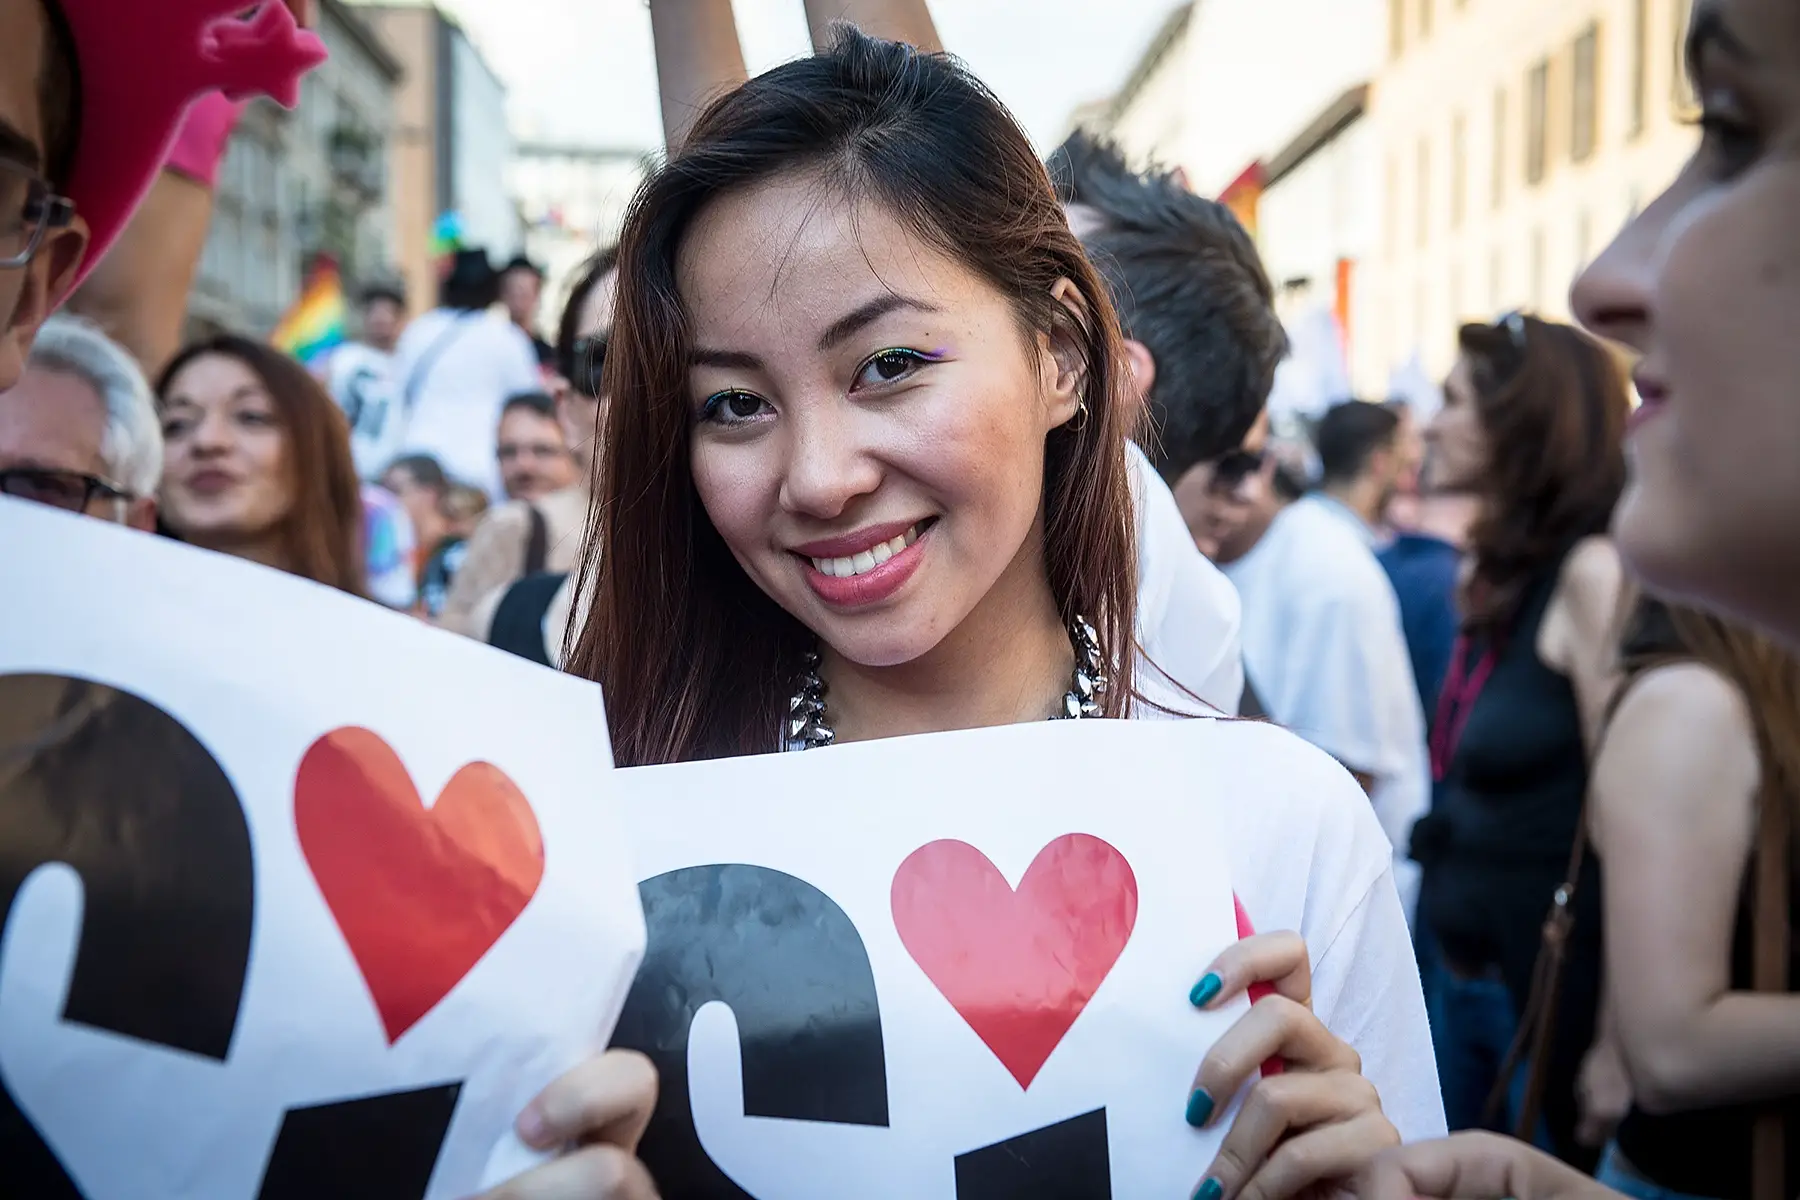 A woman holds up a sign with 'Sí' written on it. The dot of the í is a heart.